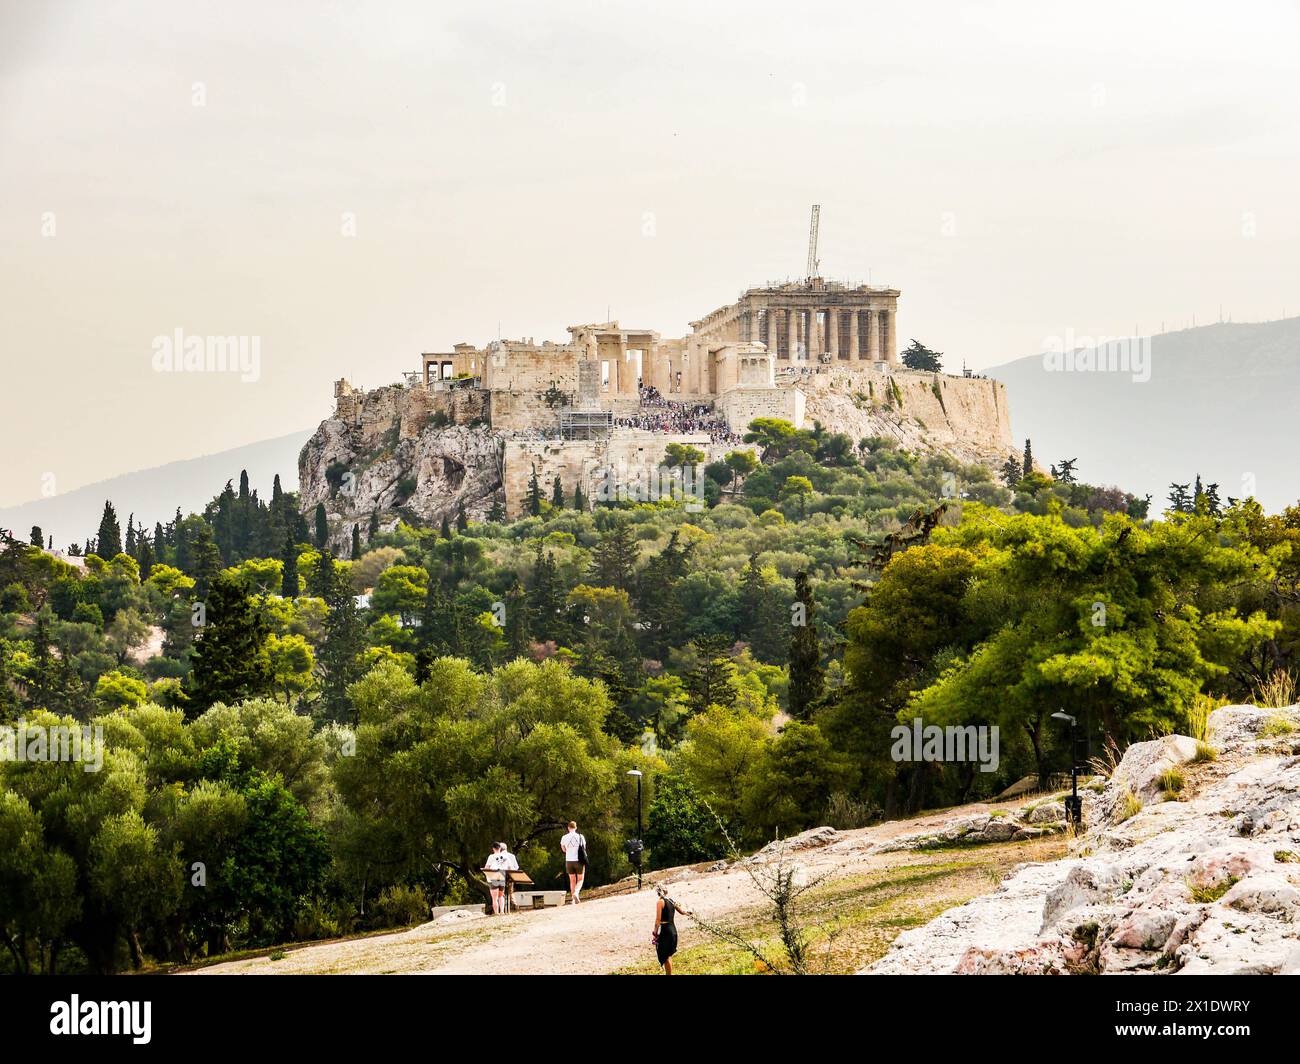 The view of the Acropolis of Athens as seen from Filopappou Hill, Athens, Greece Stock Photo